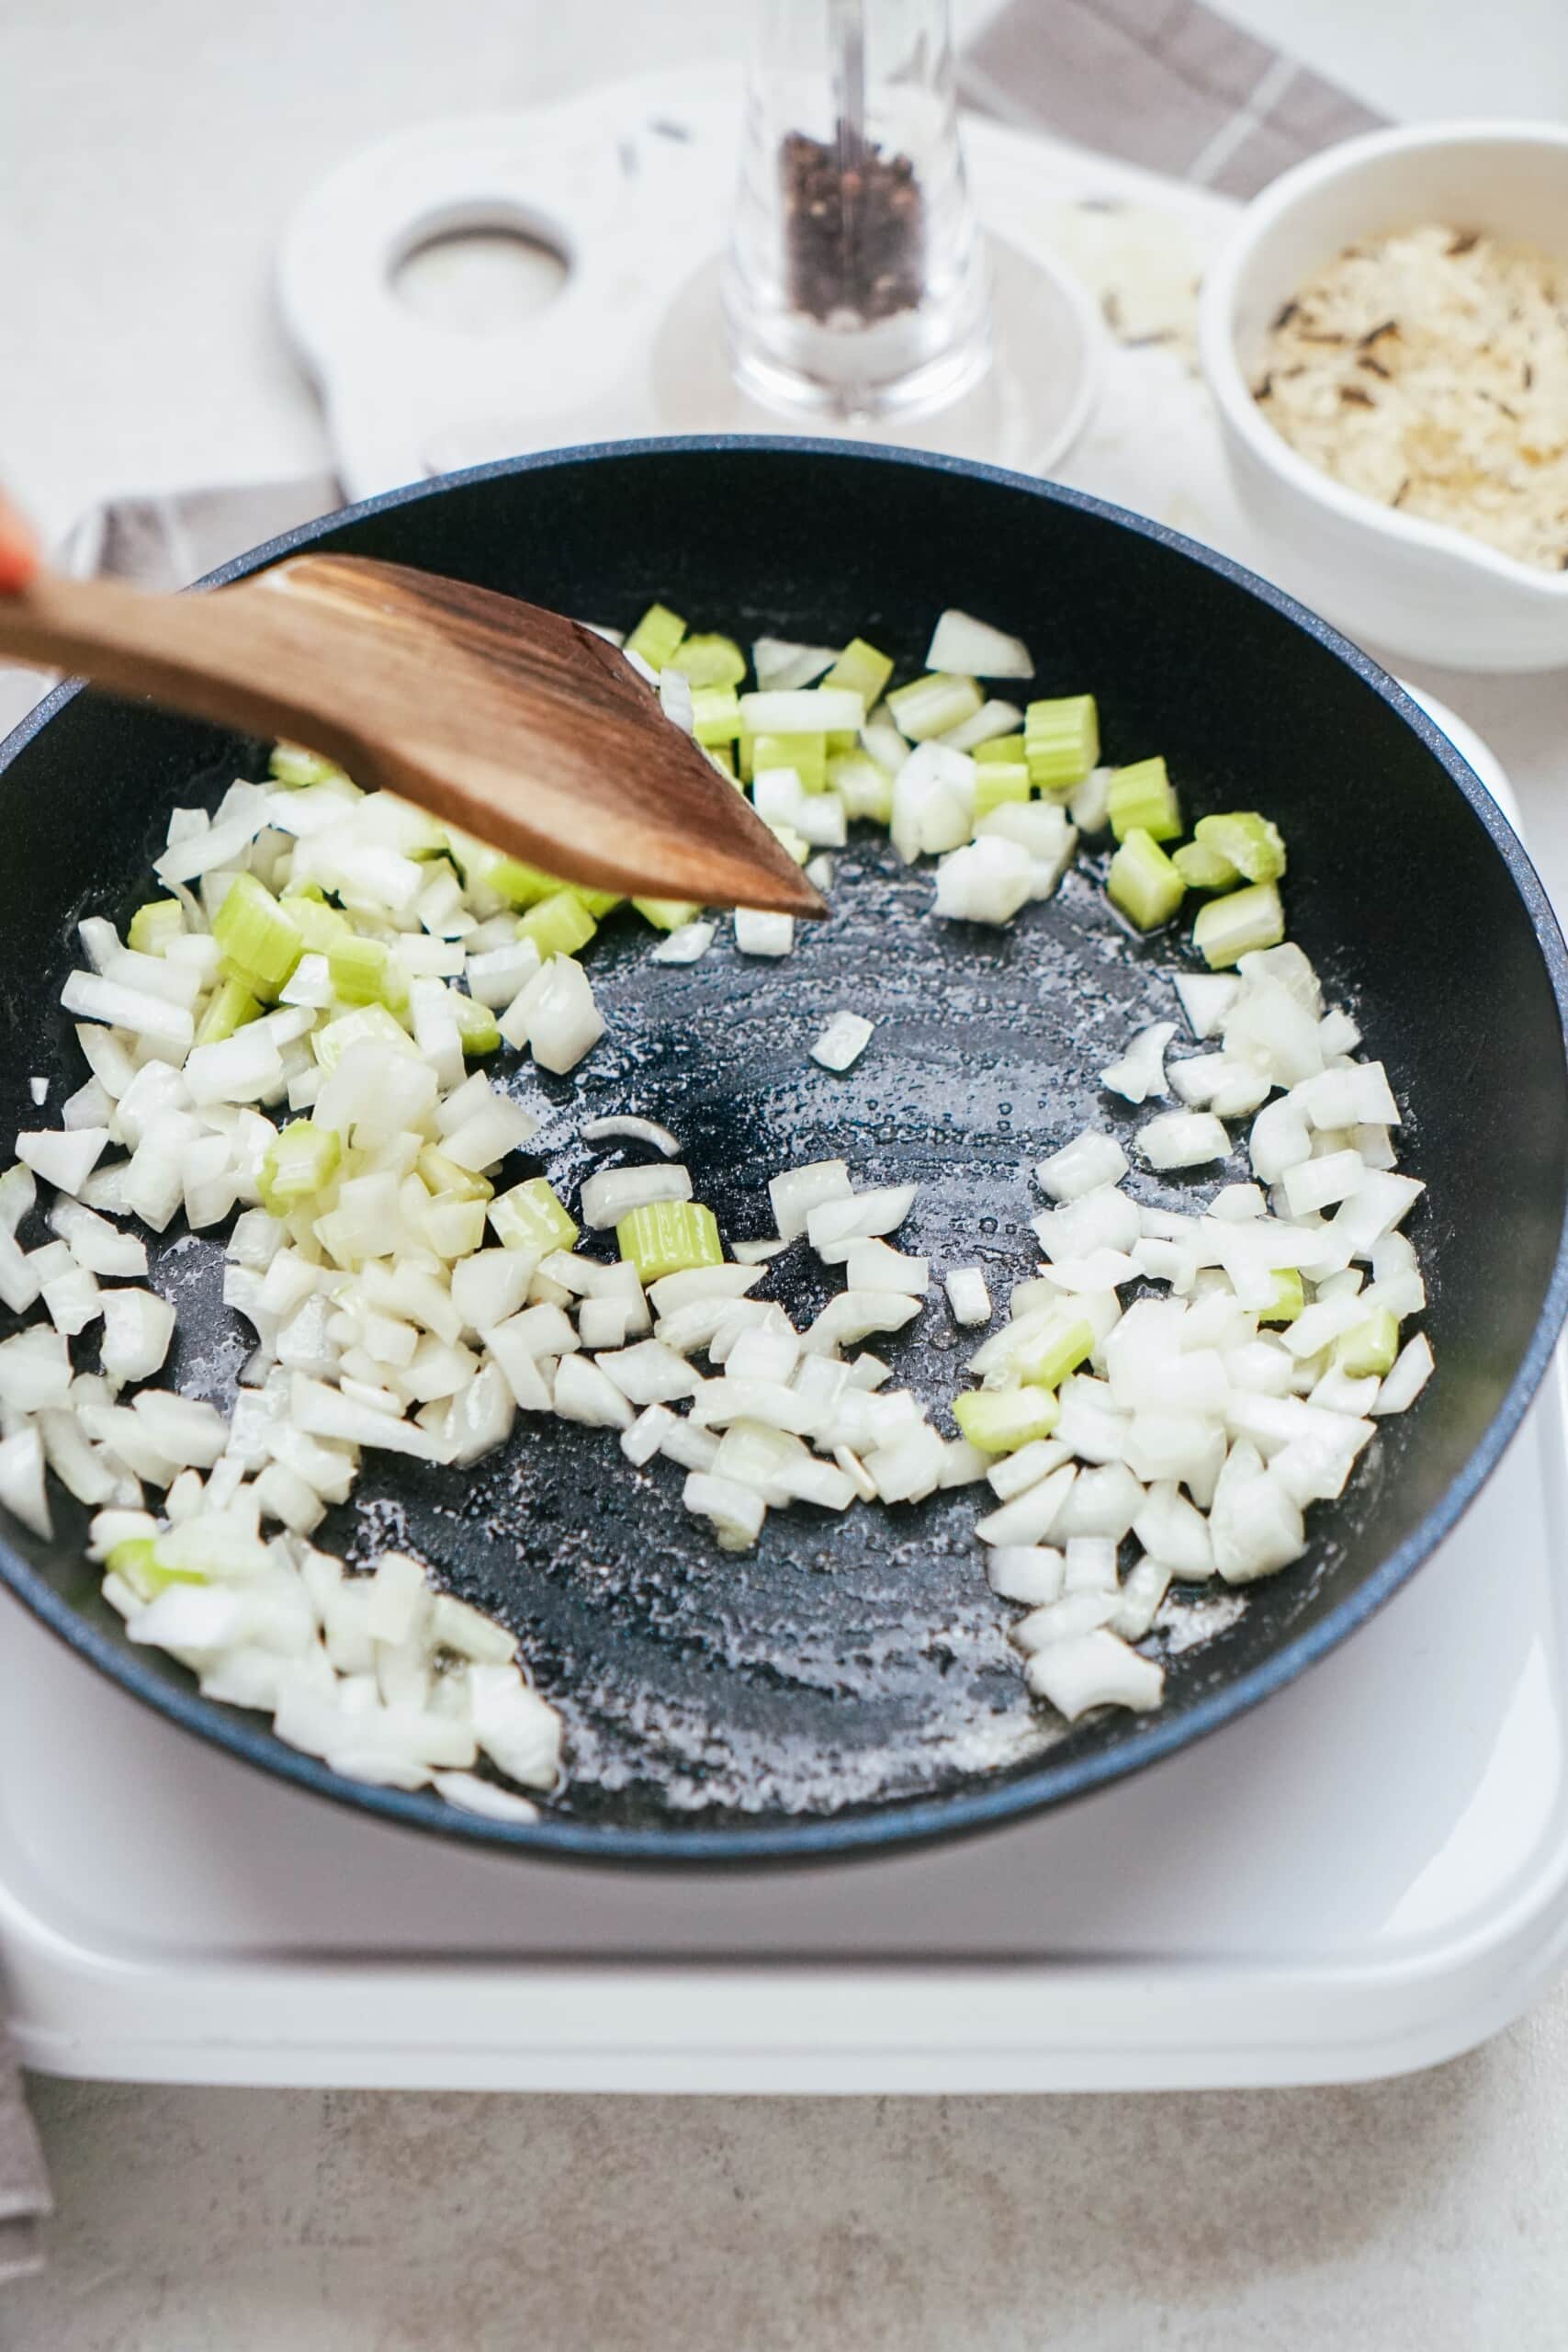 onions and celery sautéed in a skillet